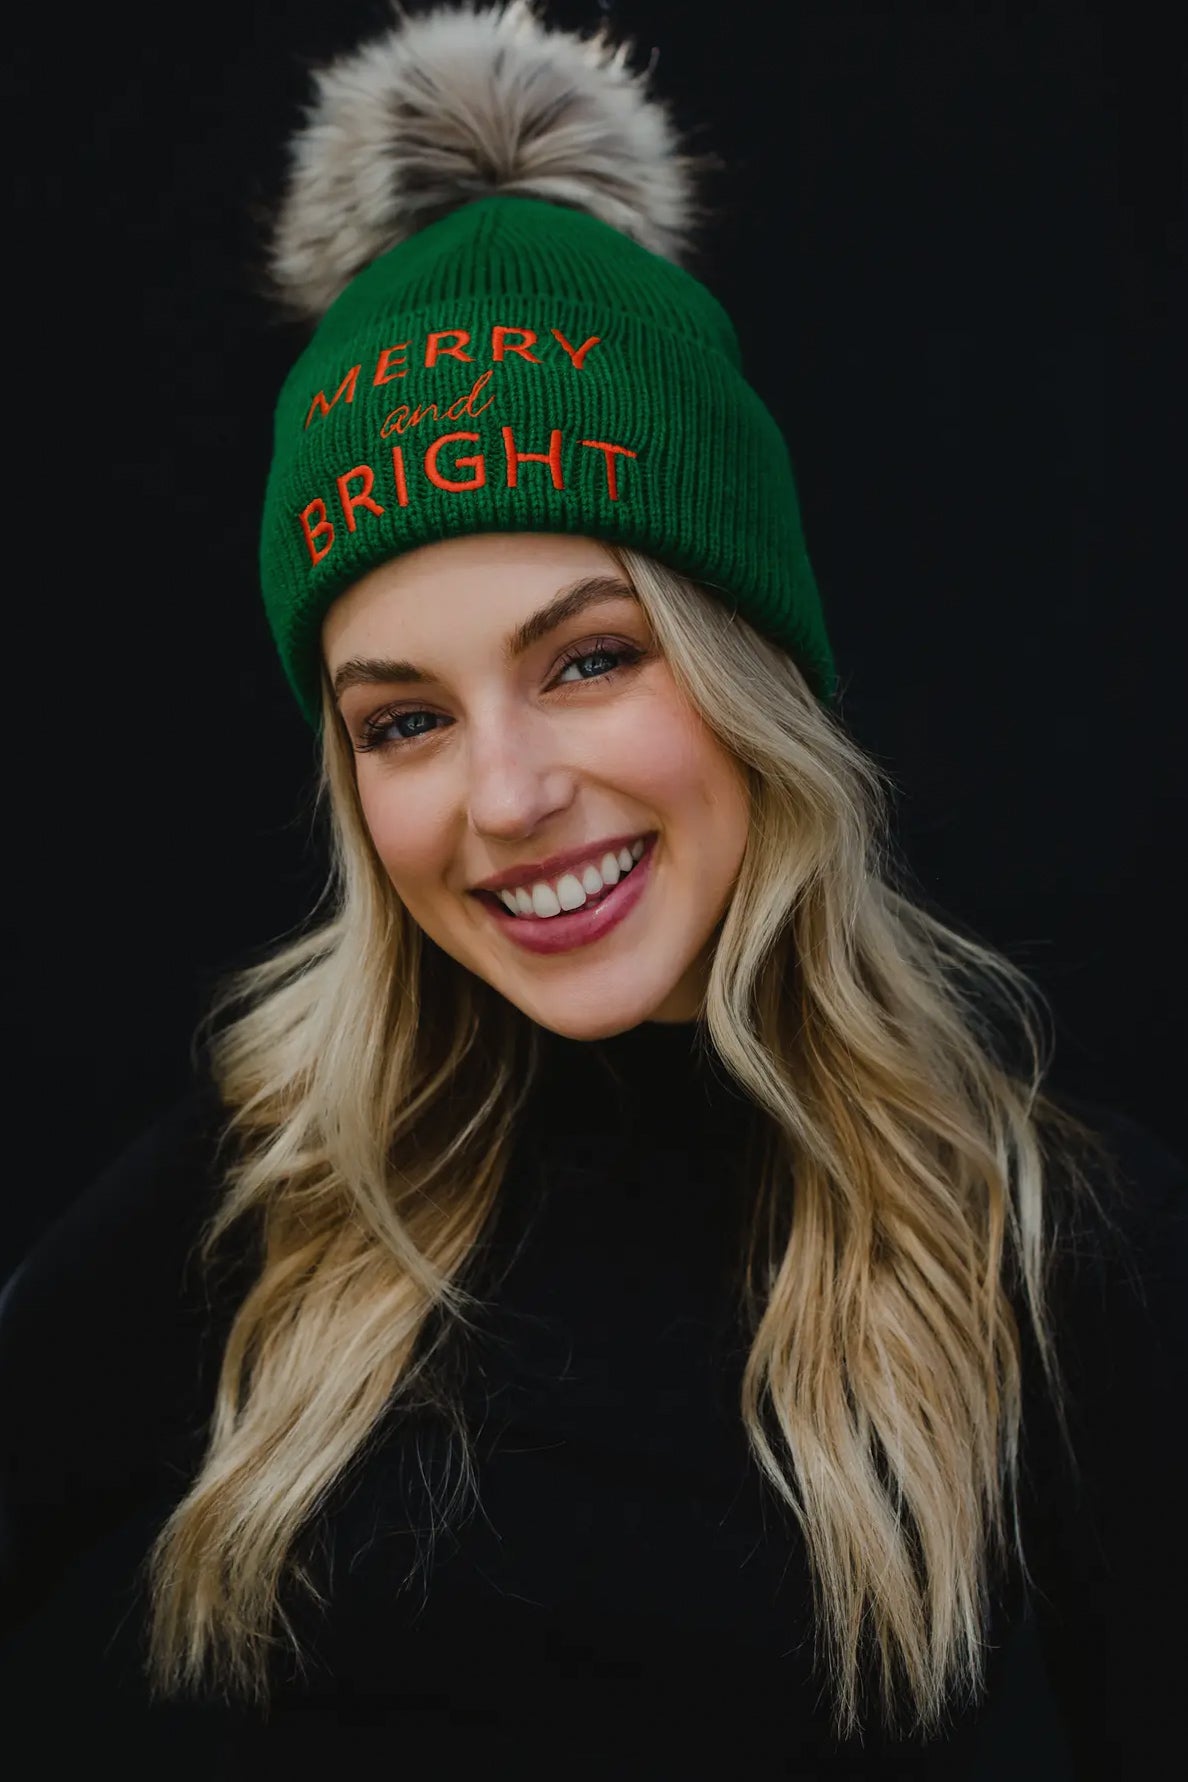 Merry and Bright Knit Beanie